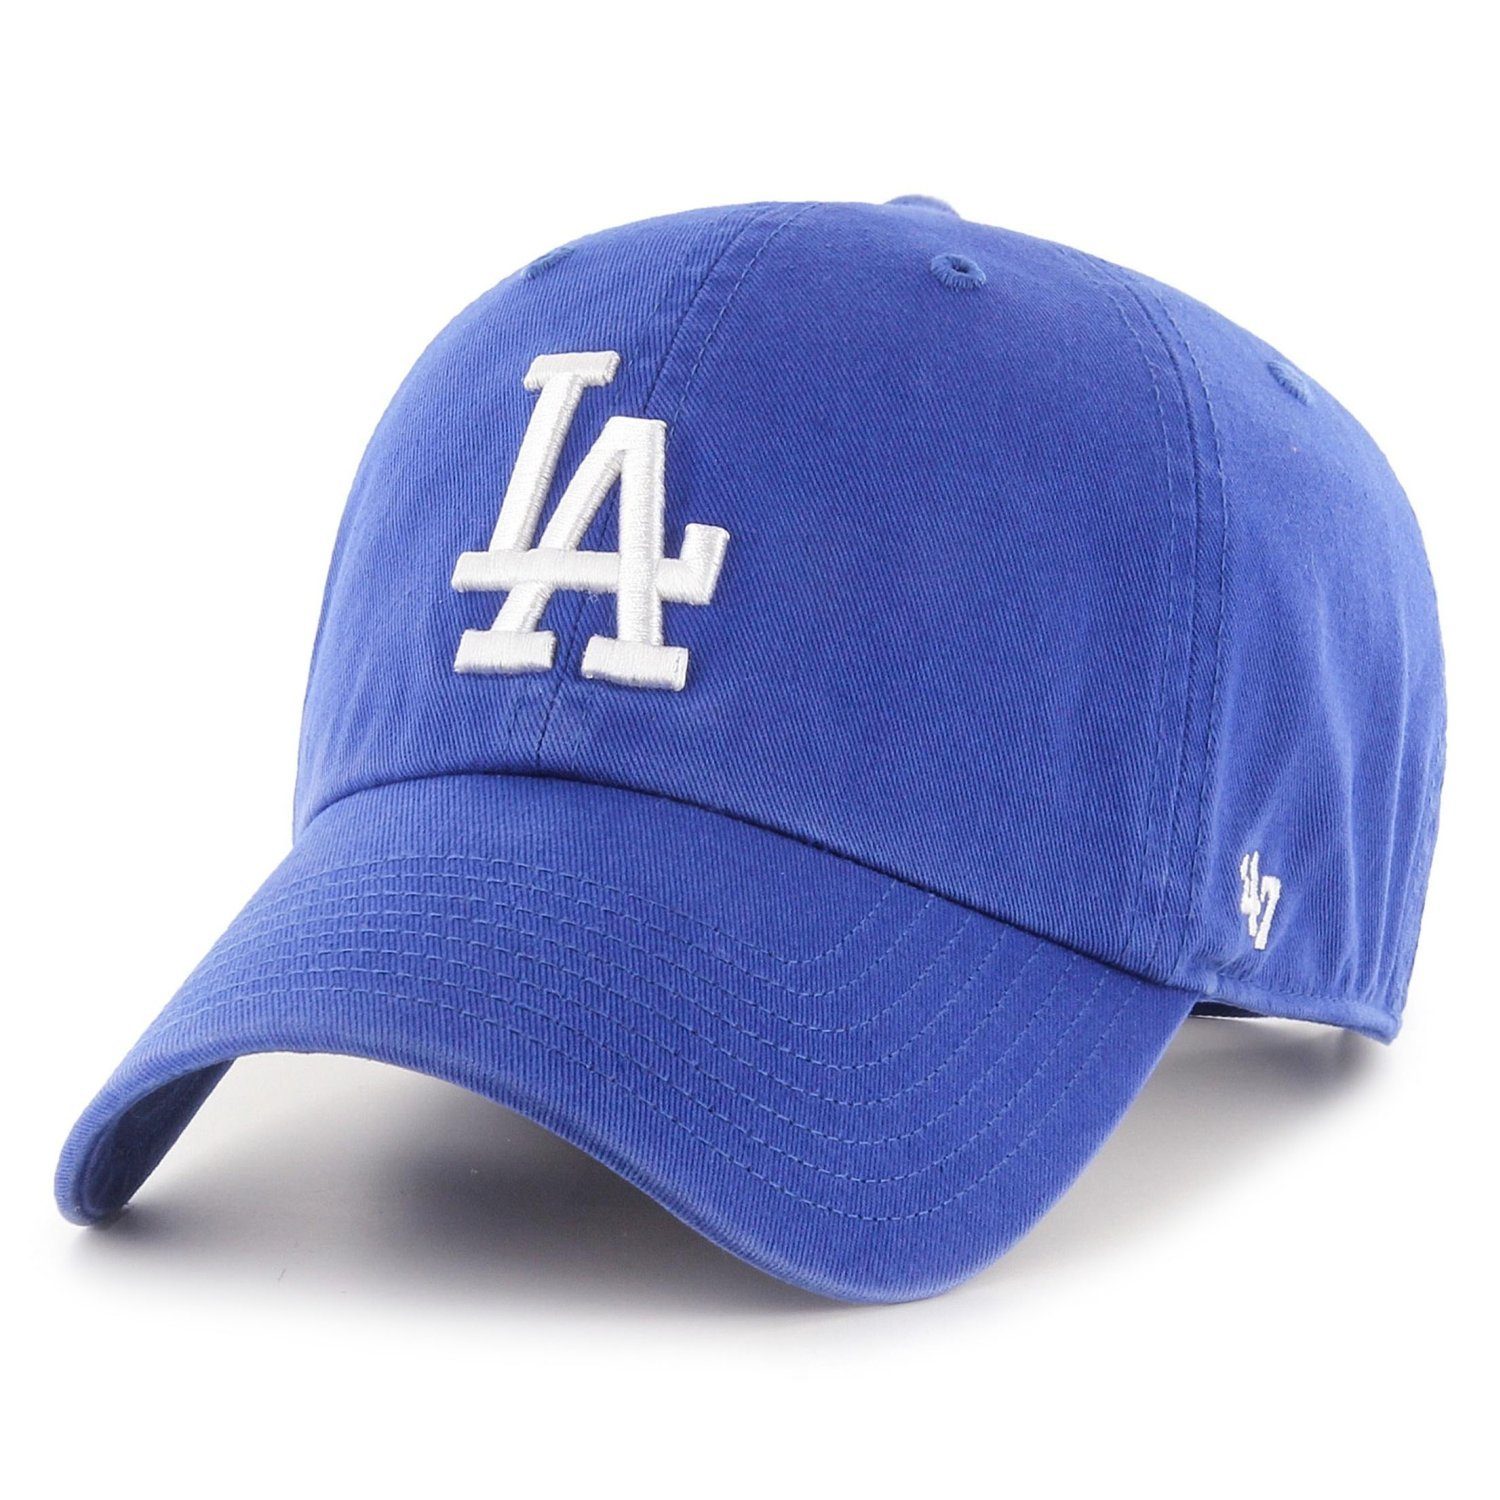 '47 Brand Trucker Cap Relaxed Fit CLEANUP Los Angeles Dodgers